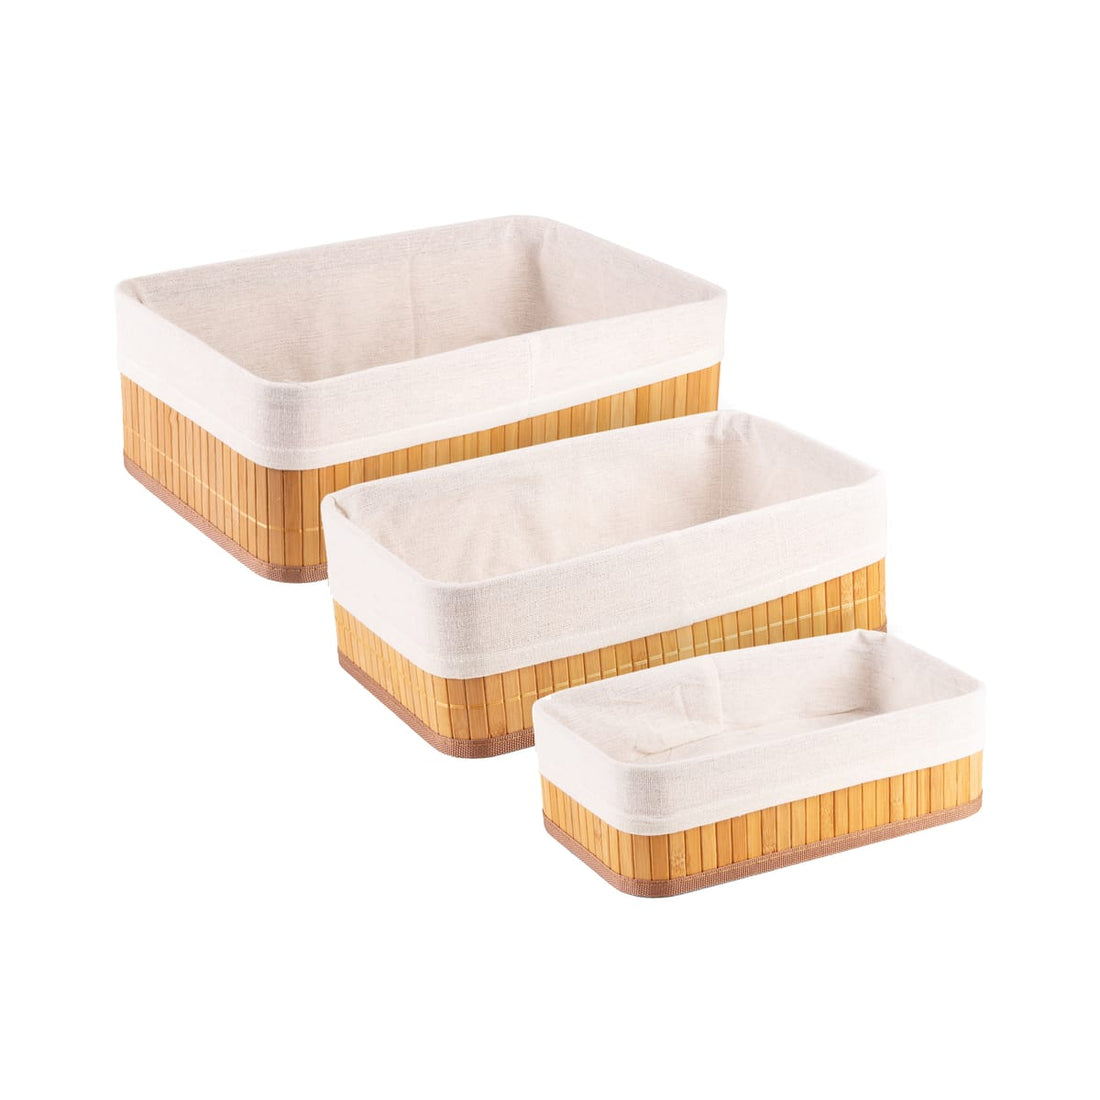 SET 3 BAMBOO BASKETS WITH INNER LINING 33X23X12 - 29X19X10 - 25X15X8